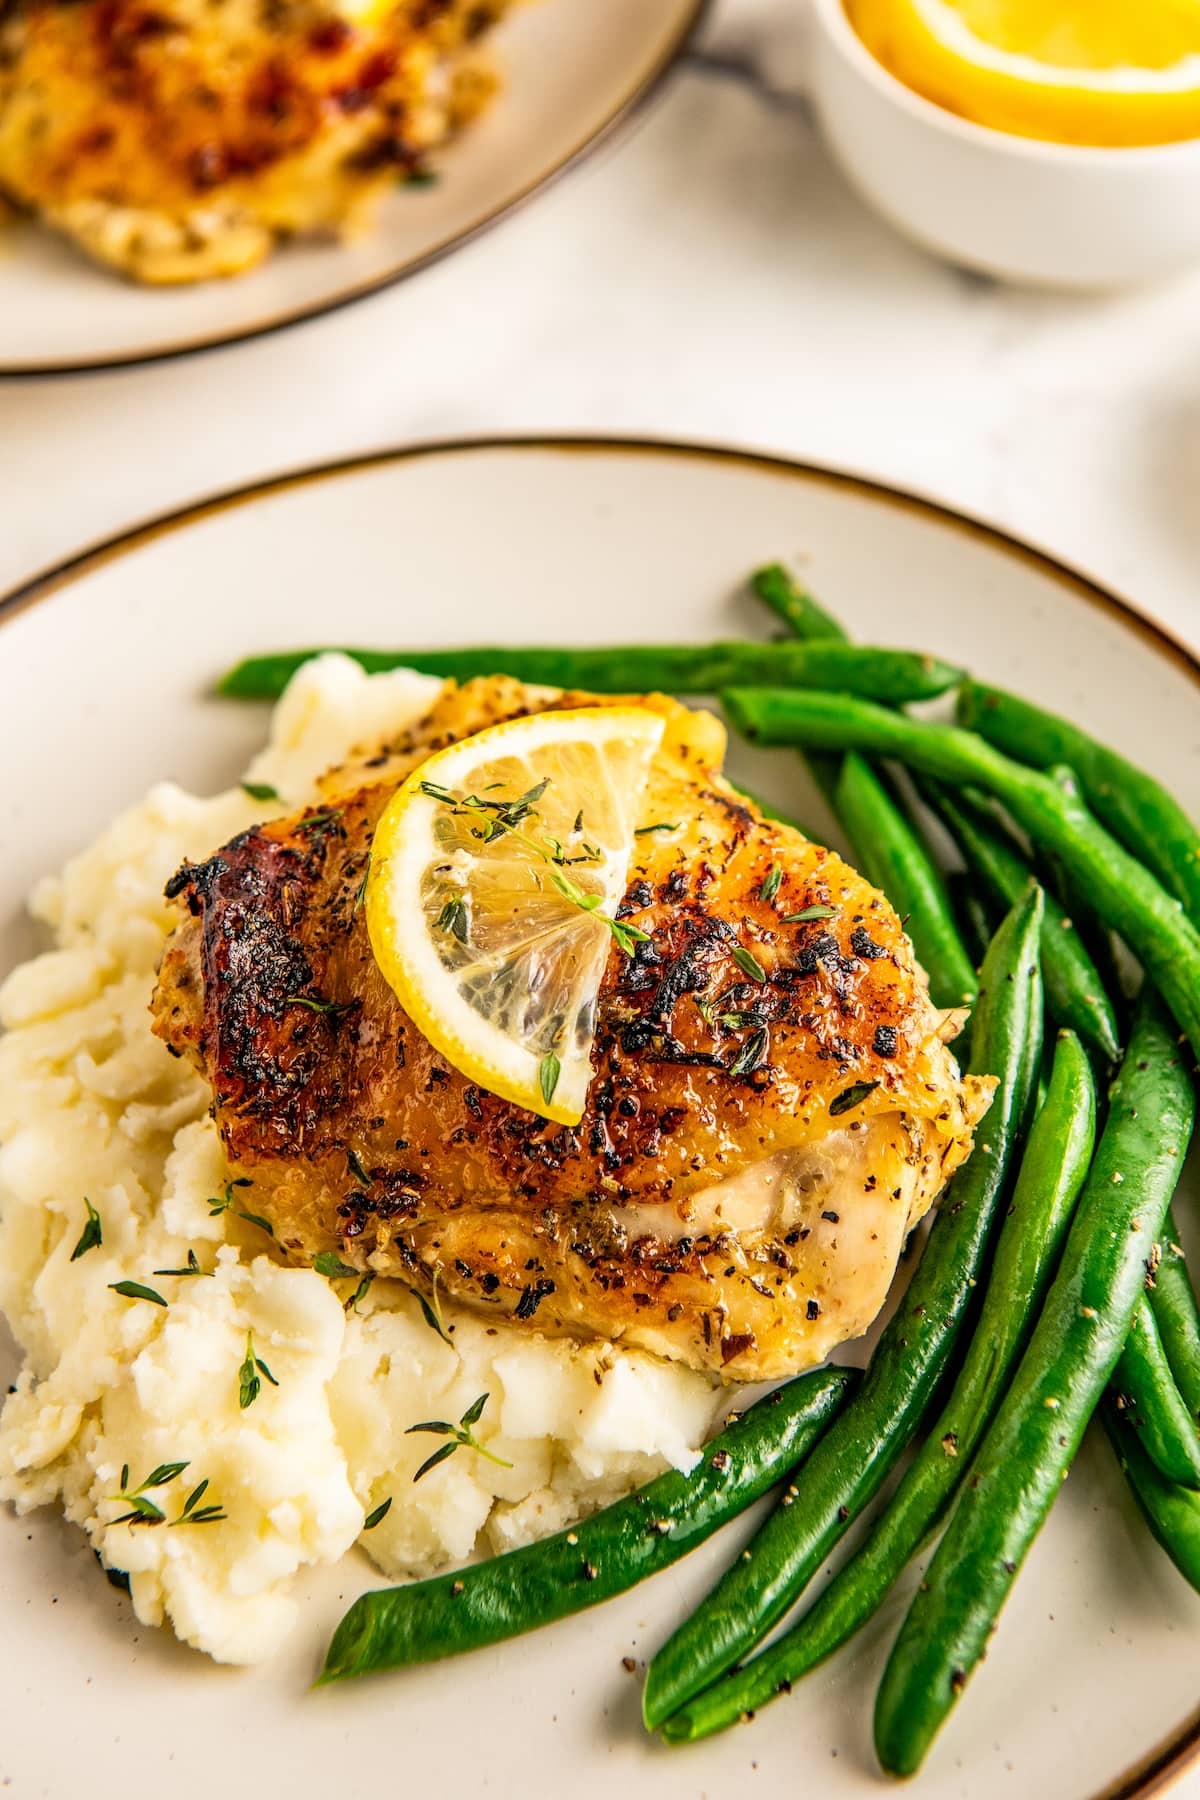 A top view of a plate with baked lemon pepper chicken with crispy skin over a side of mashed potatoes, and green beans.